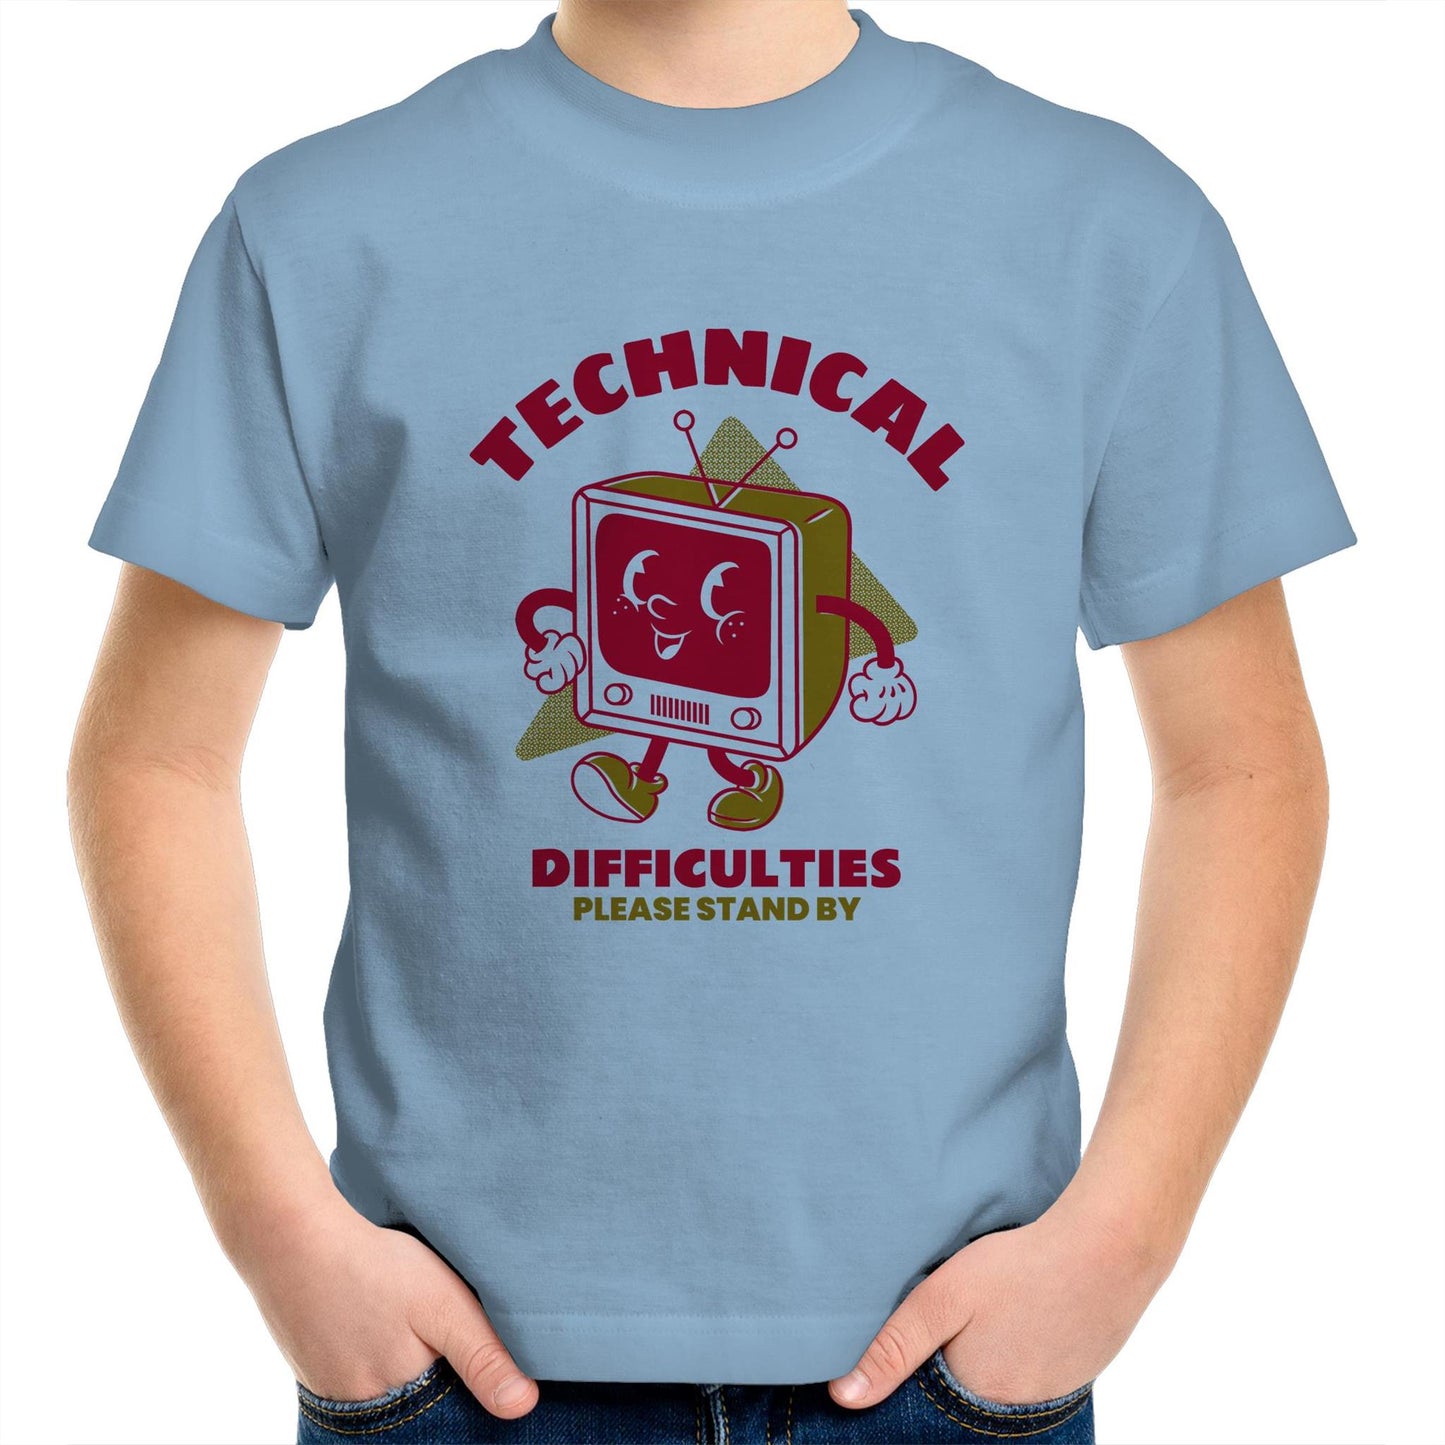 Retro TV Technical Difficulties - Kids Youth Crew T-Shirt Carolina Blue Kids Youth T-shirt Retro Tech